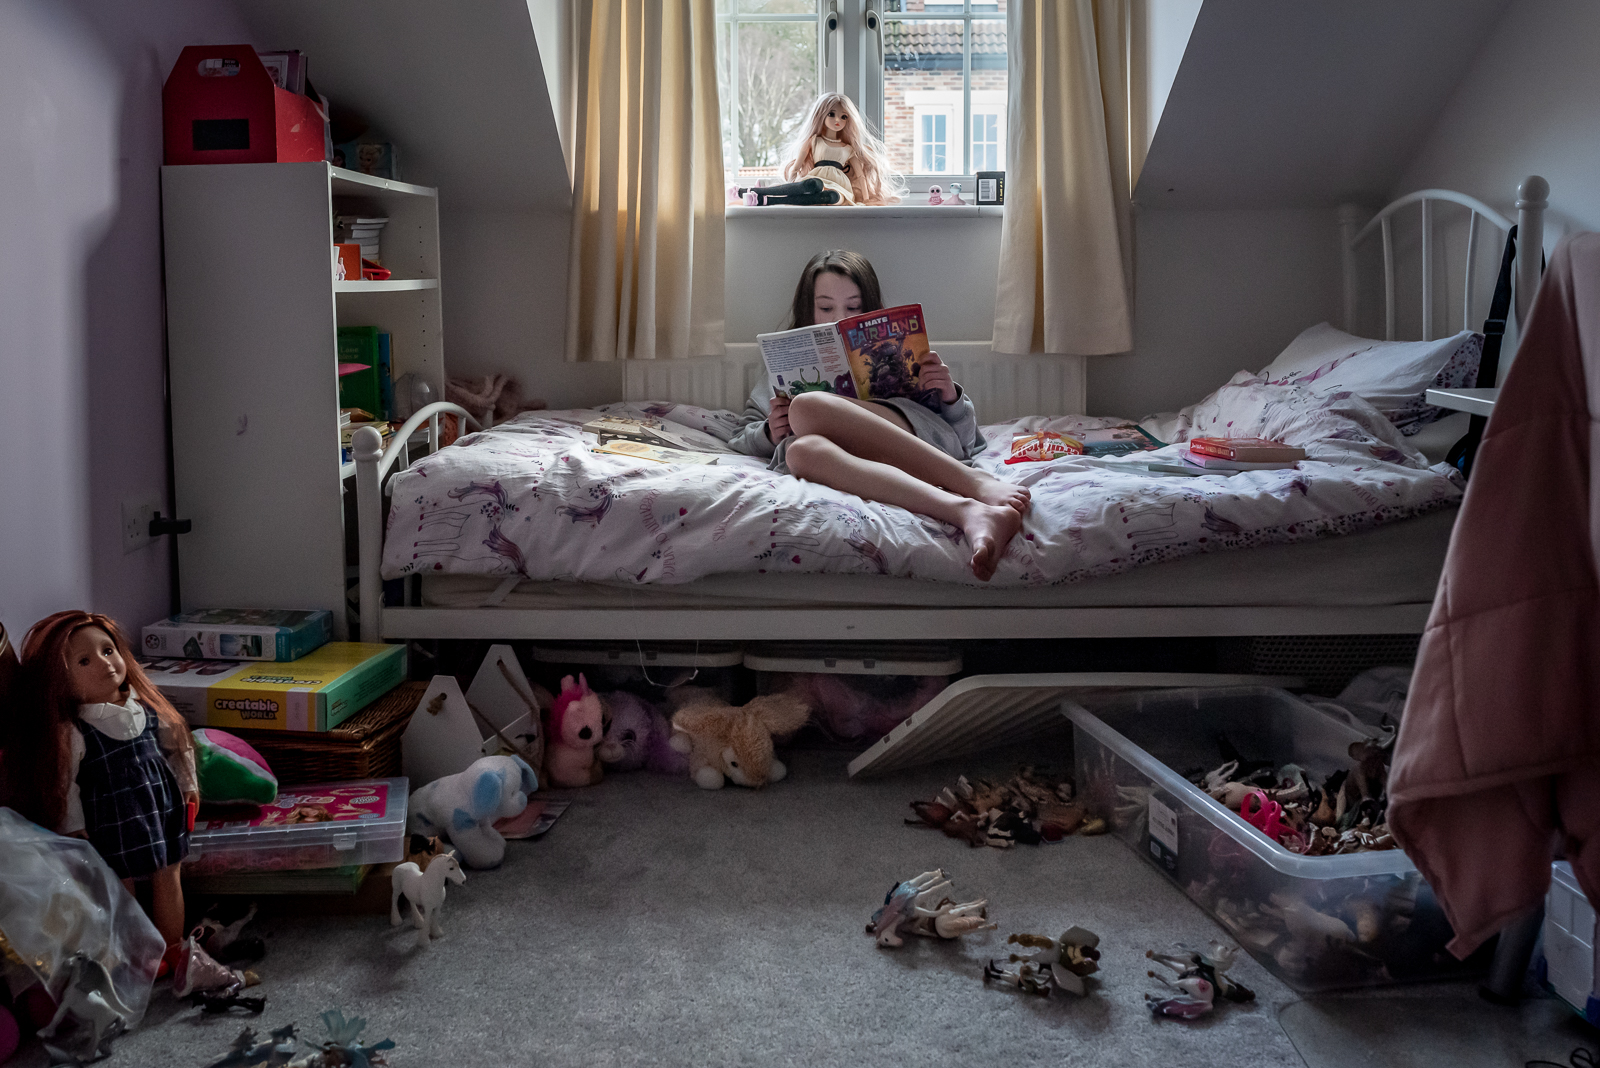 preteen environmental portrait in bedroom strewn with toys